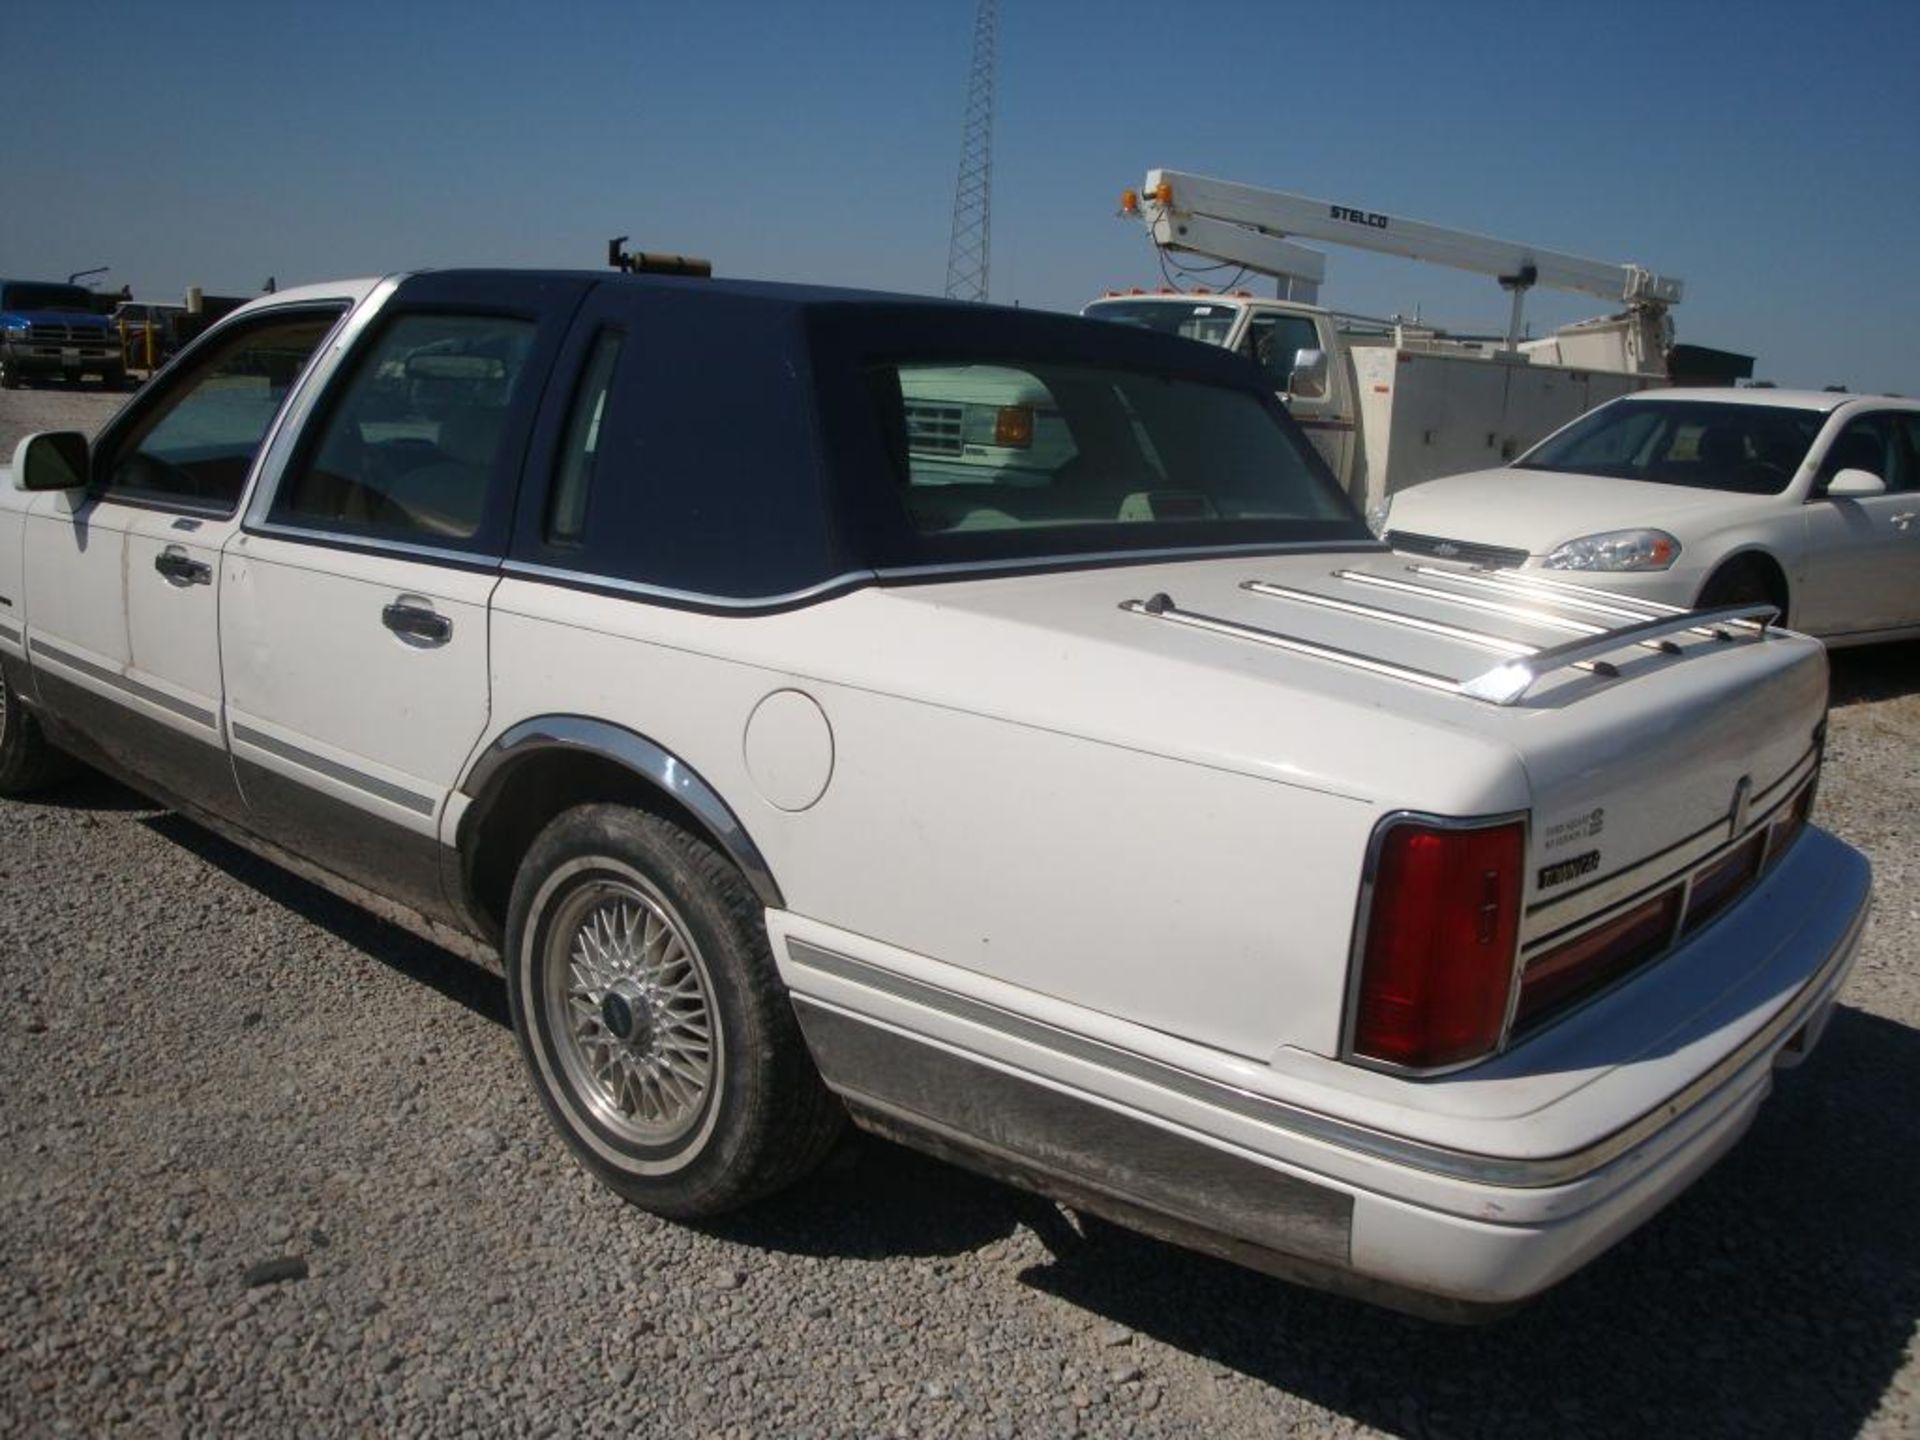 (Title) 1995 Lincoln Towncar,approx. 238,000 miles, Caution-soft brakes, otherwise no issues - Image 12 of 12